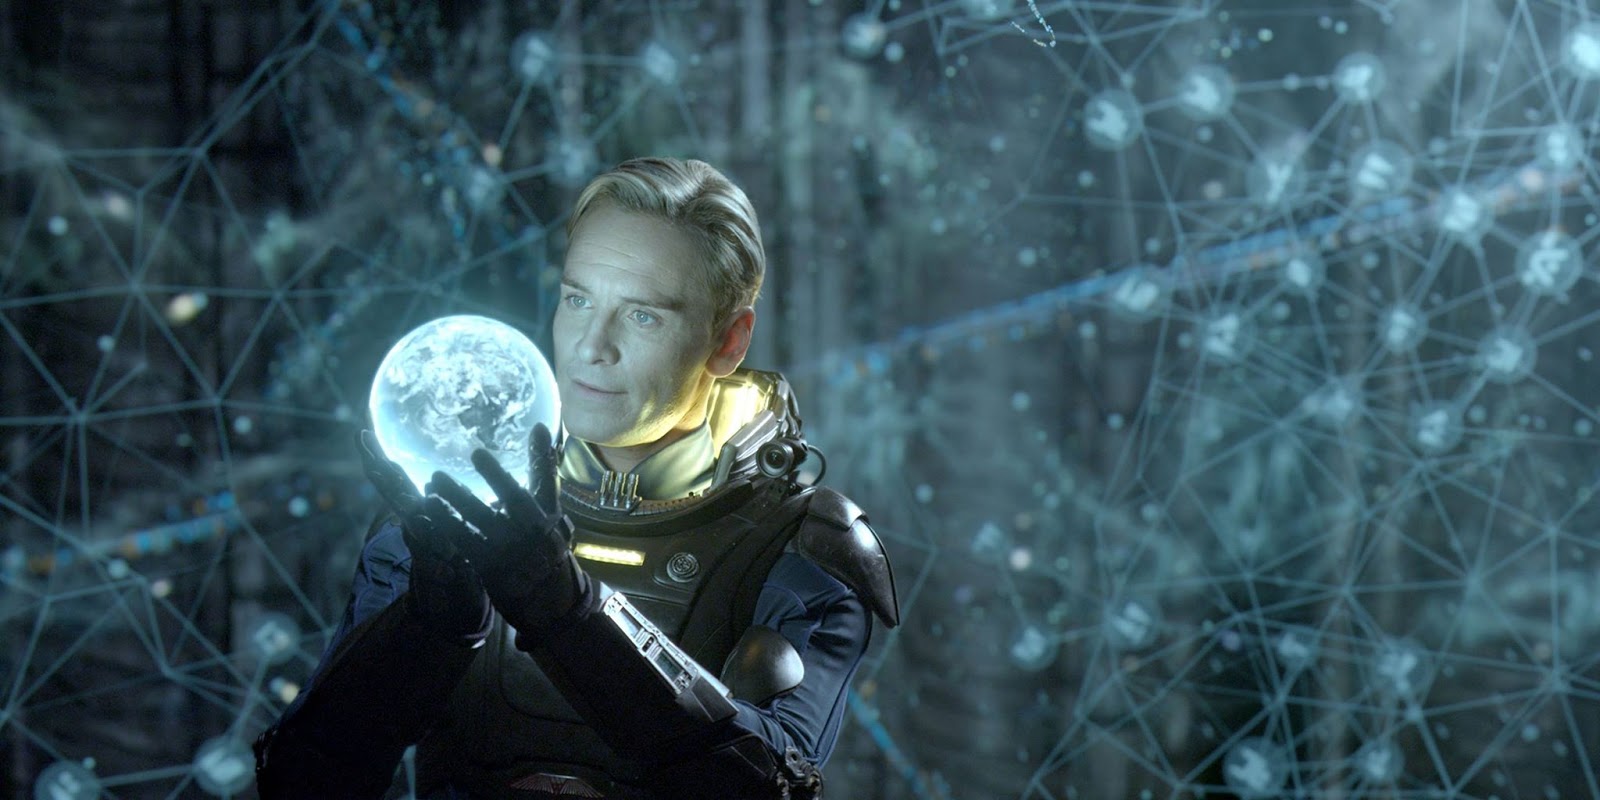 David, a blond man played by Michael Fassbender, standing in the middle of glowing markings floating in the air holding a glowing orb.